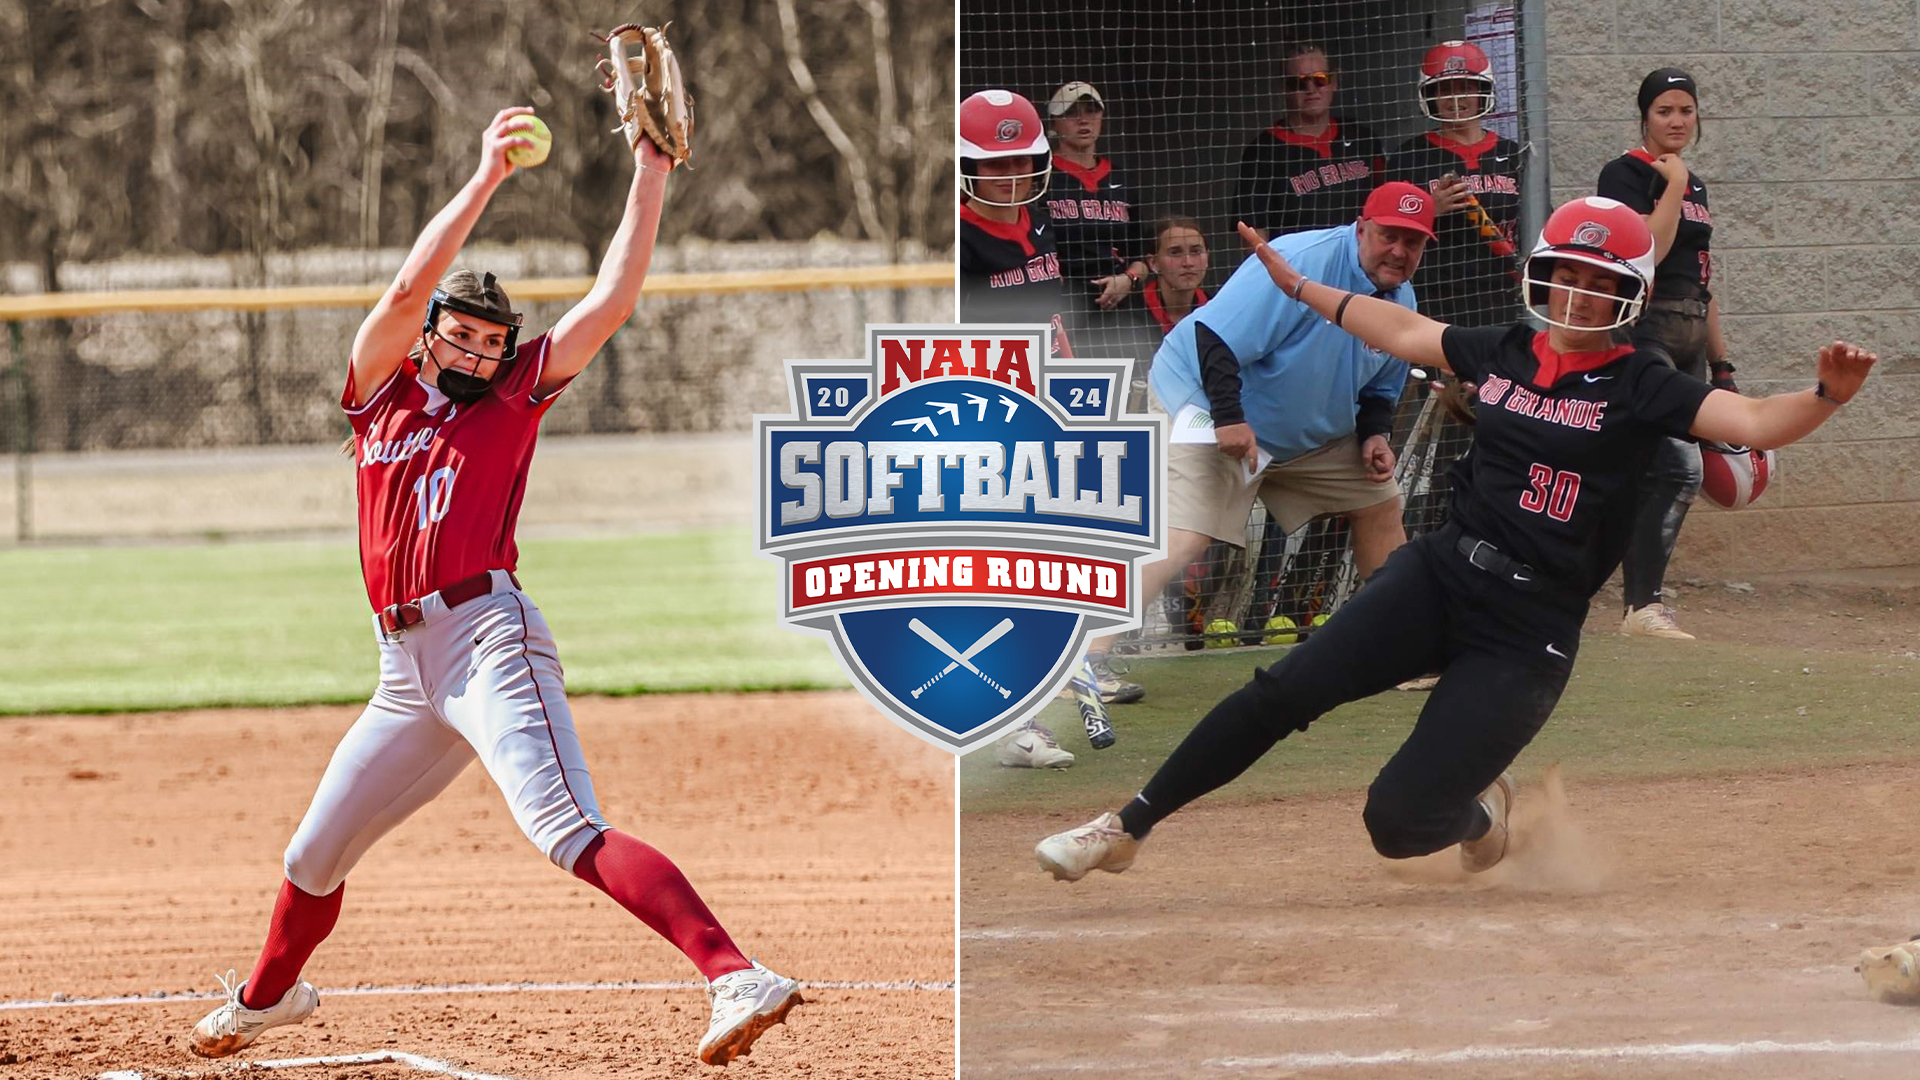 IU Southeast and Rio Grande will compete in the NAIA Softball National Championship Opening Round beginning on Monday, May 13.